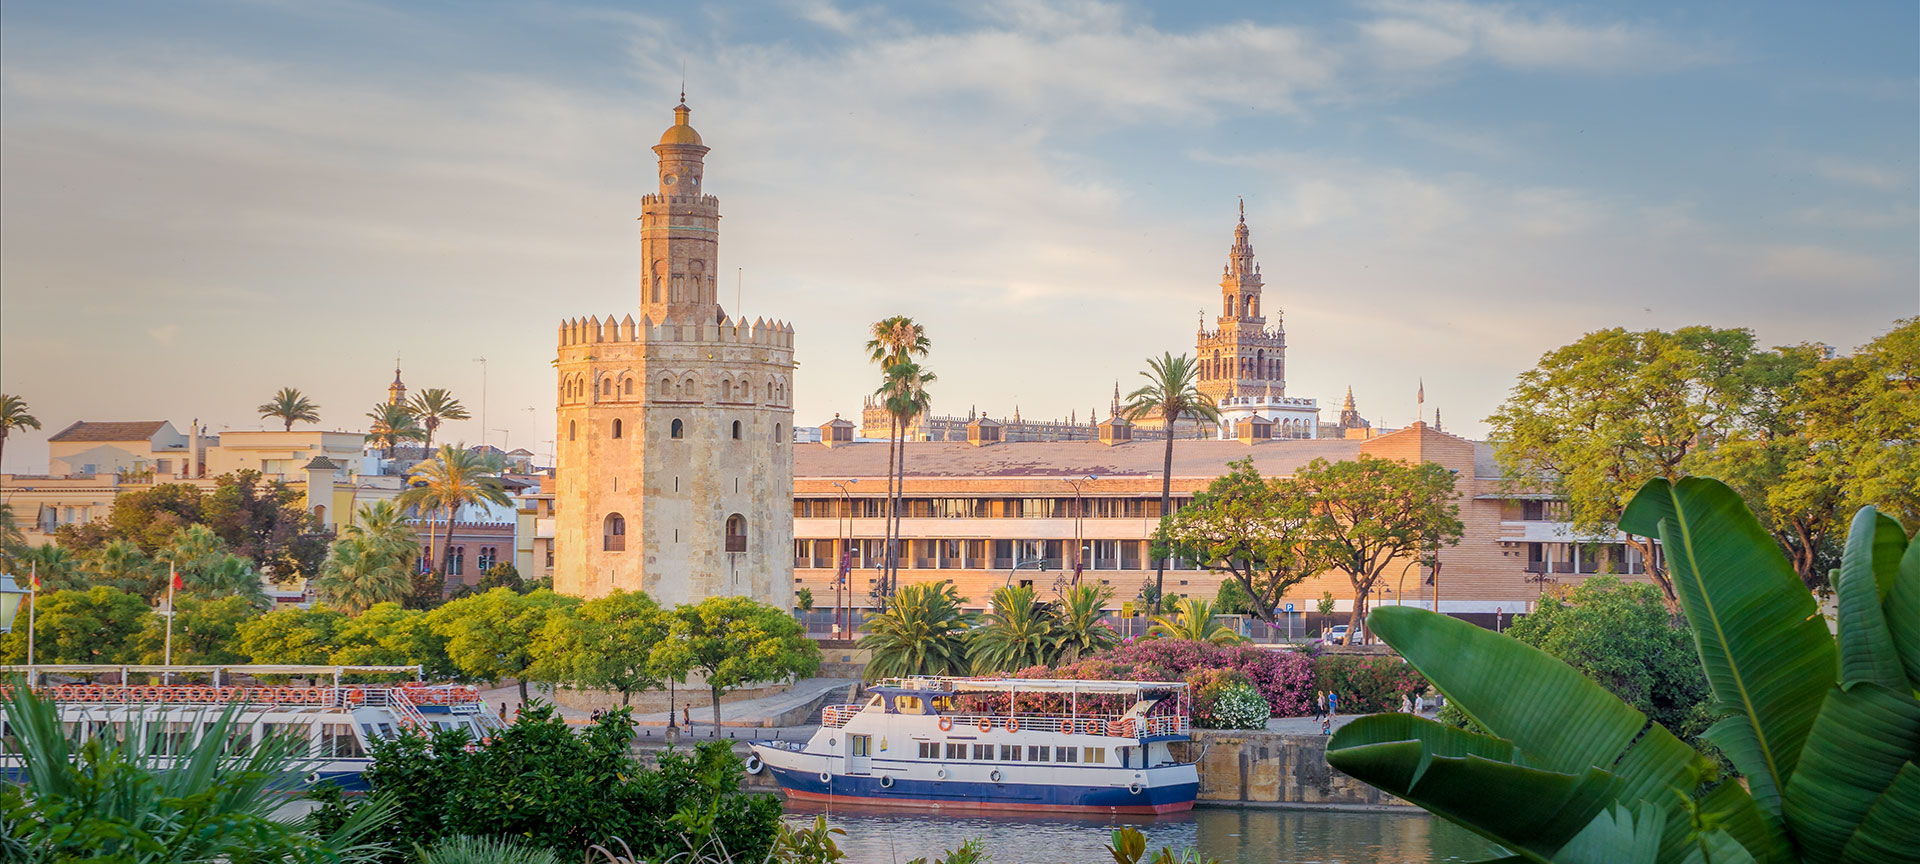 The Torre del Oro with the Giralda in the background, in Seville, Andalusia